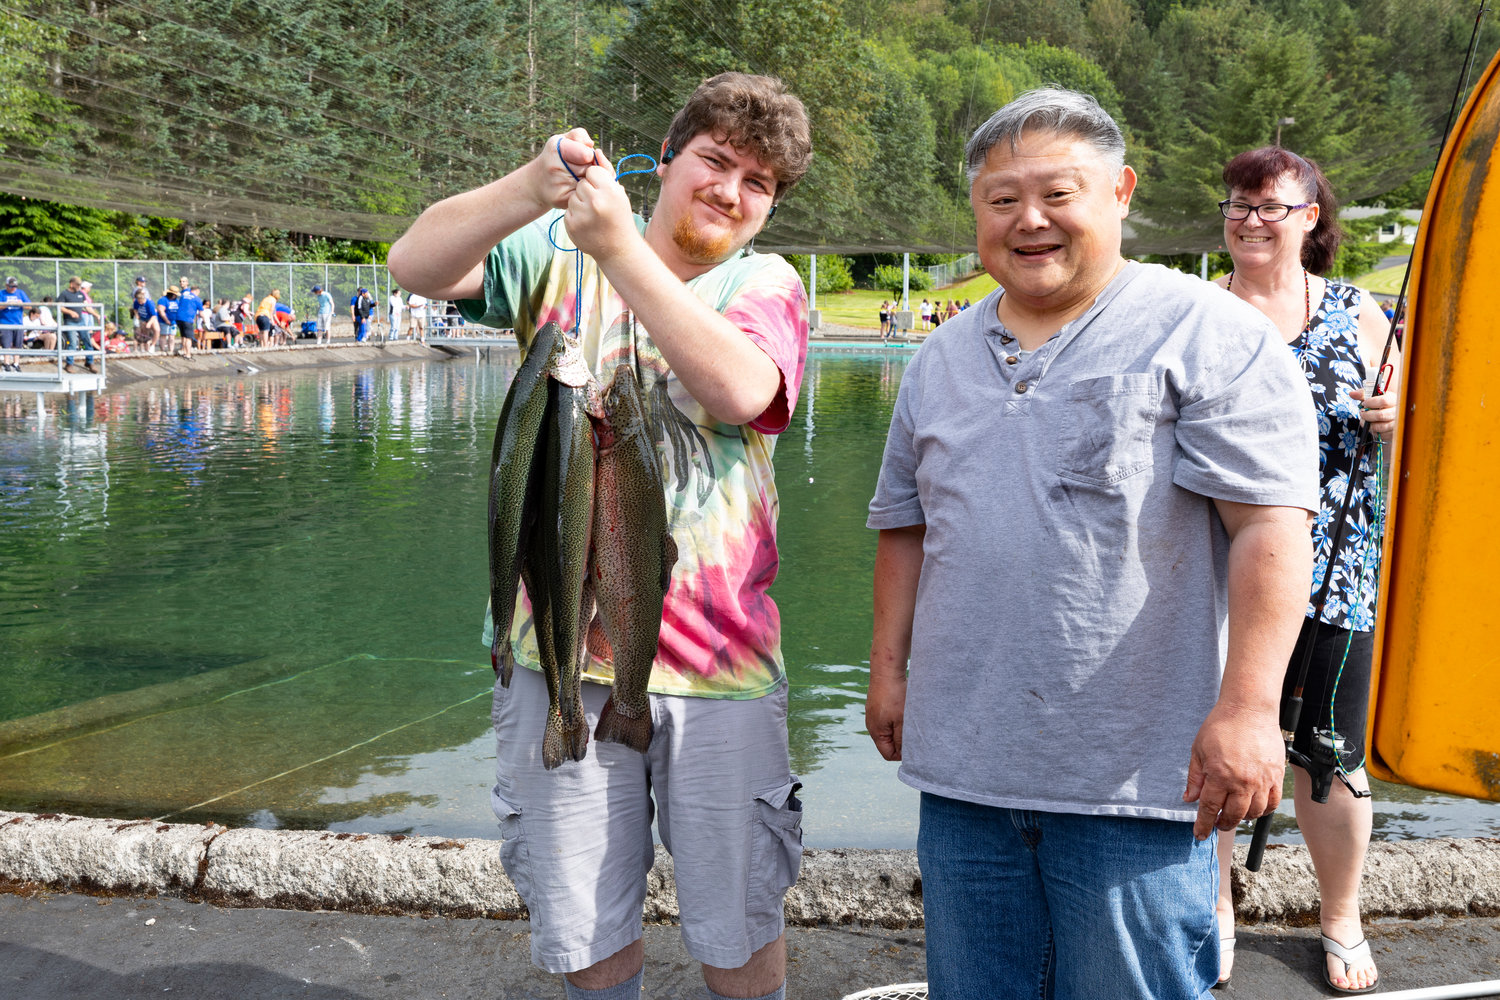 Anglers at the Merwin Special Kids Day in Woodland show off their catch on July 9 in Woodland.